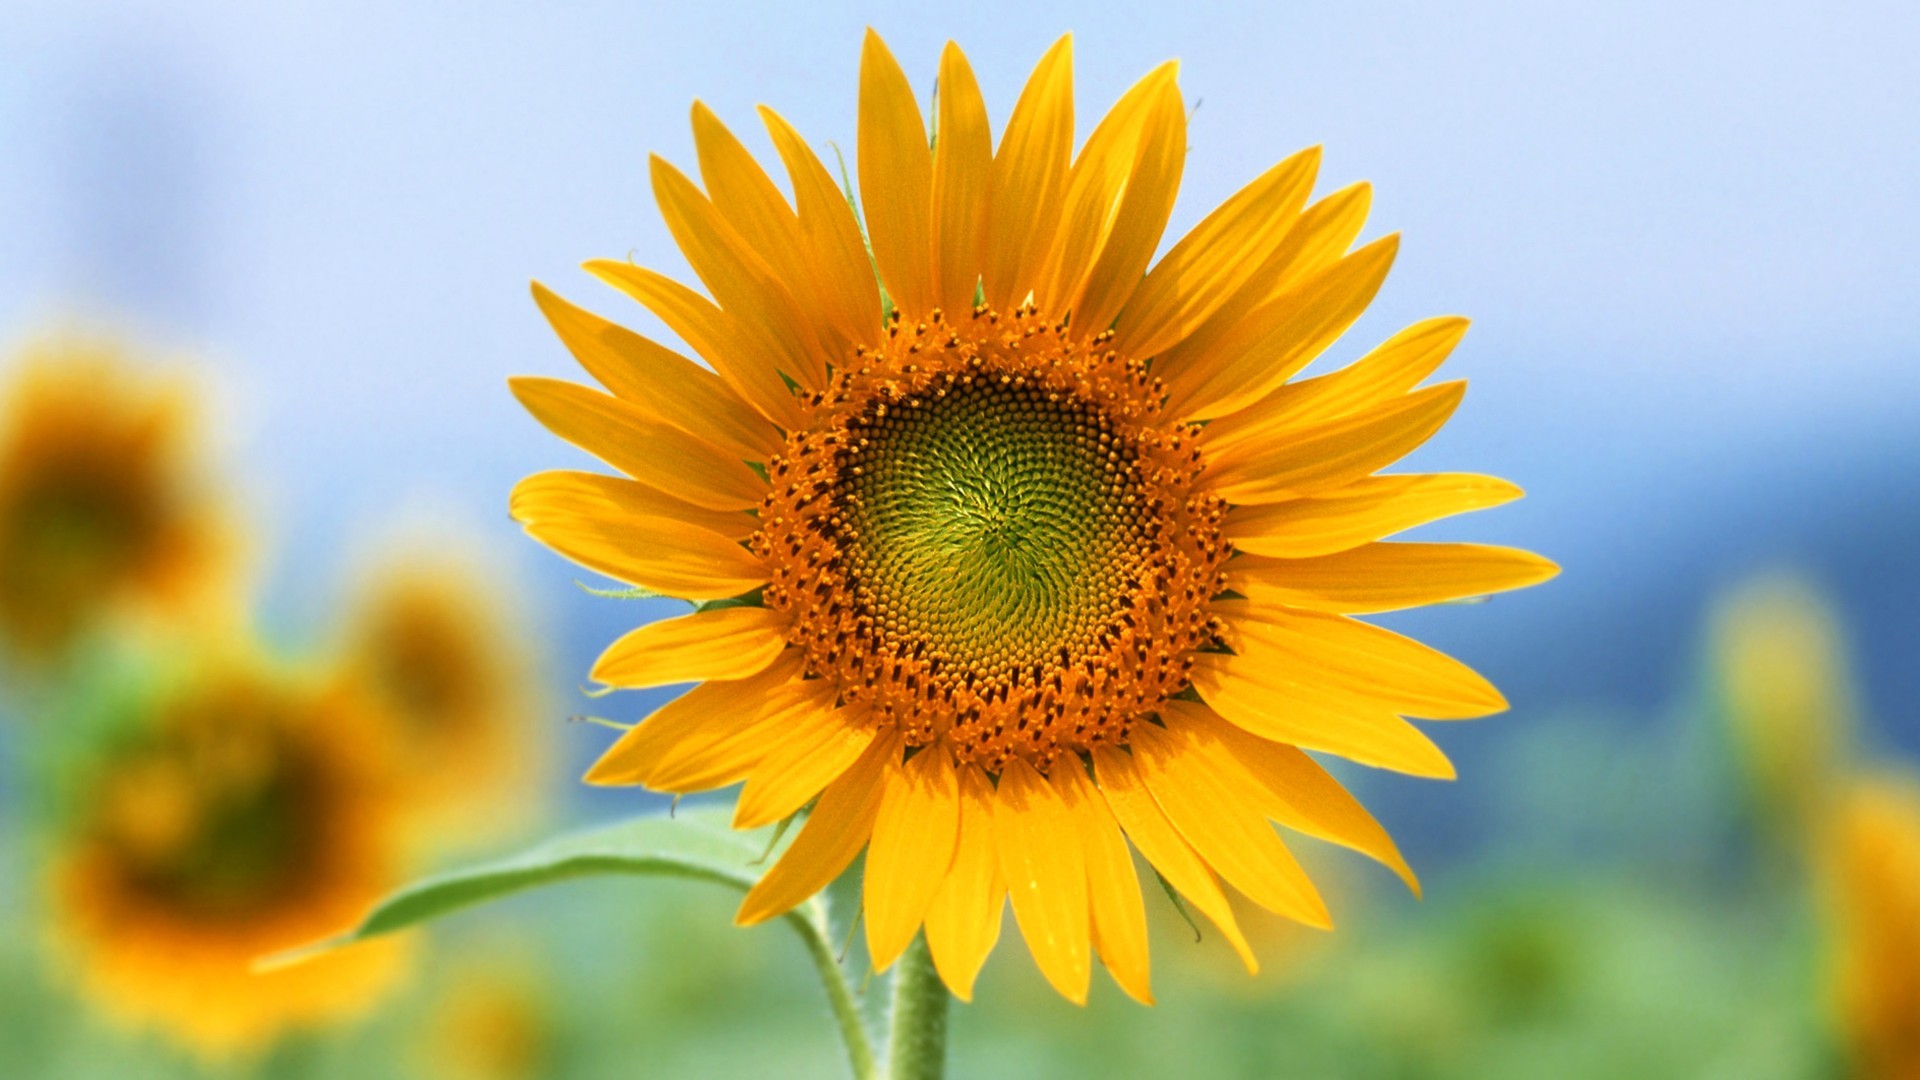 General 1920x1080 flowers sunflowers yellow flowers outdoors plants